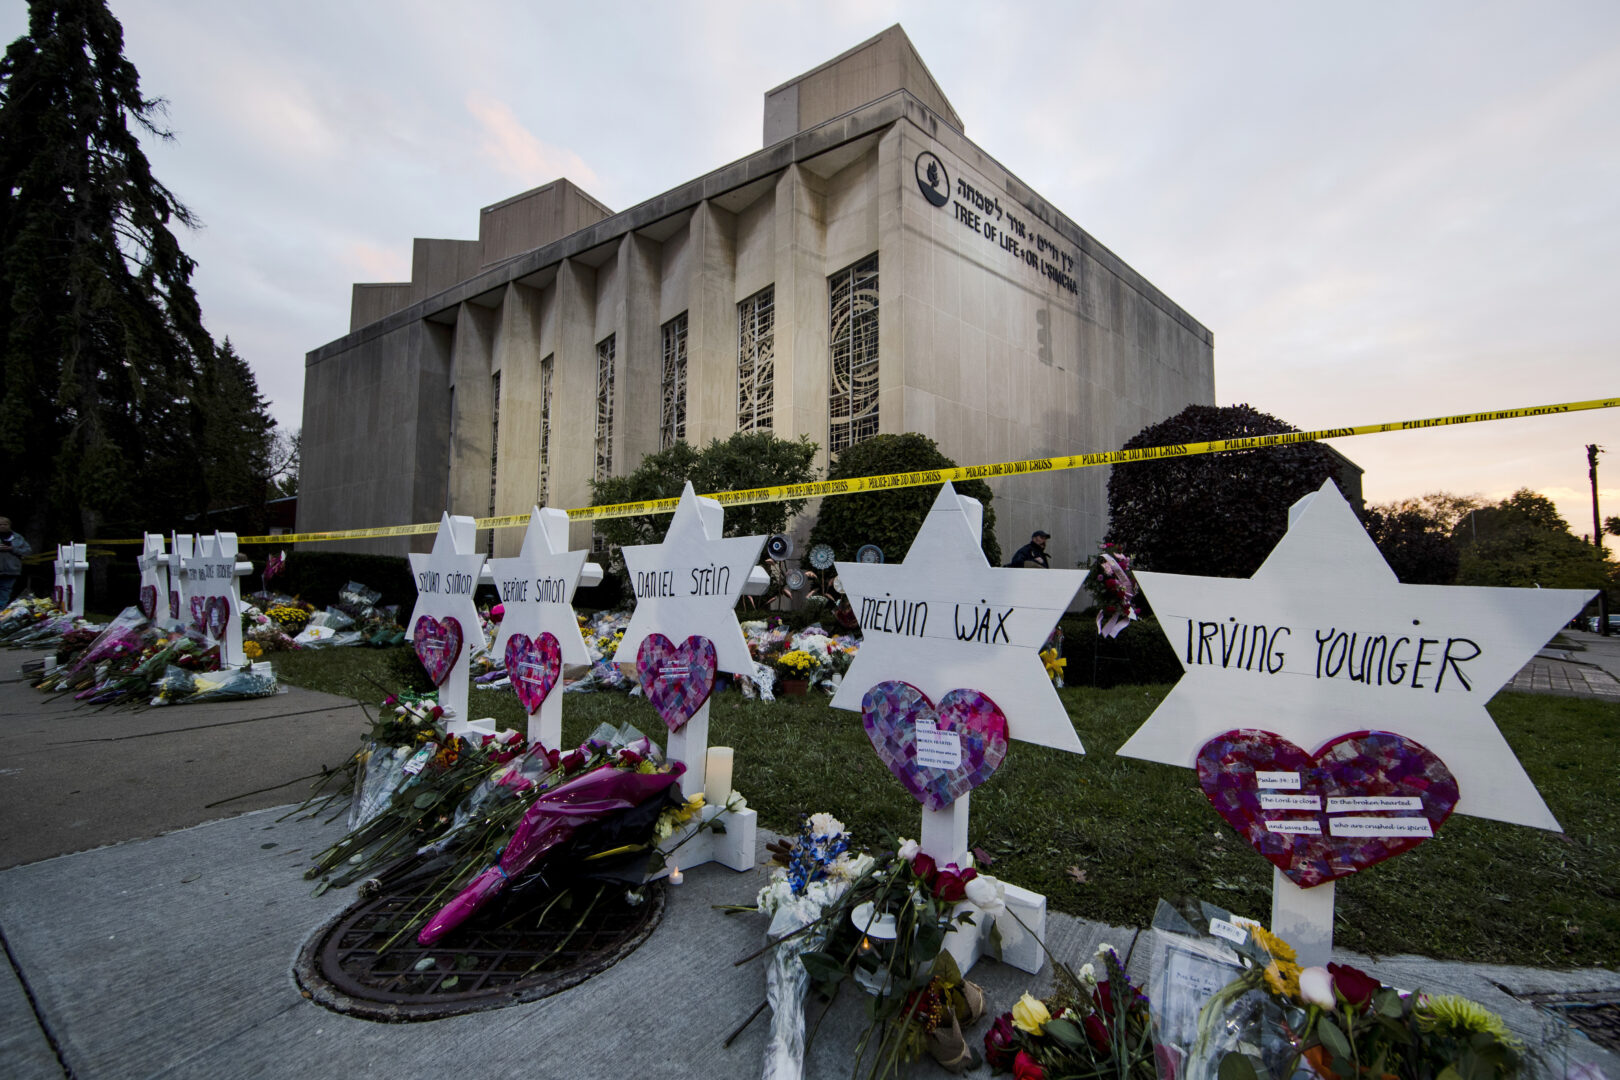 A makeshift memorial stands outside the Tree of Life Synagogue in the aftermath of a deadly shooting in Pittsburgh, Oct. 29, 2018. More than a week after convicting a gunman in the deadliest antisemitic attack in U.S. history, jurors began hearing arguments in federal court Monday about whether he should receive the death penalty for killing 11 worshippers inside the Pittsburgh synagogue. 